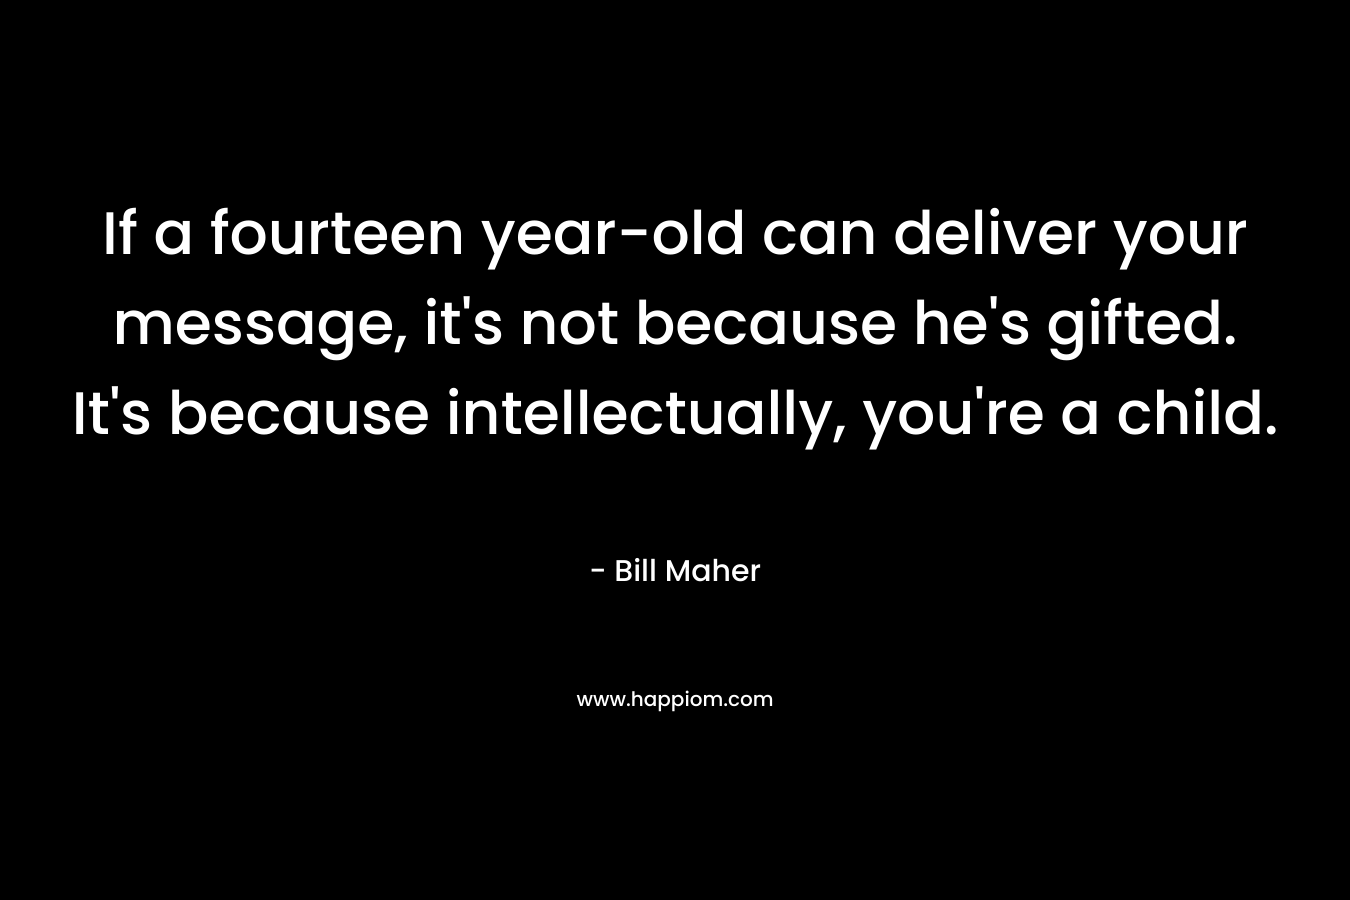 If a fourteen year-old can deliver your message, it's not because he's gifted. It's because intellectually, you're a child.